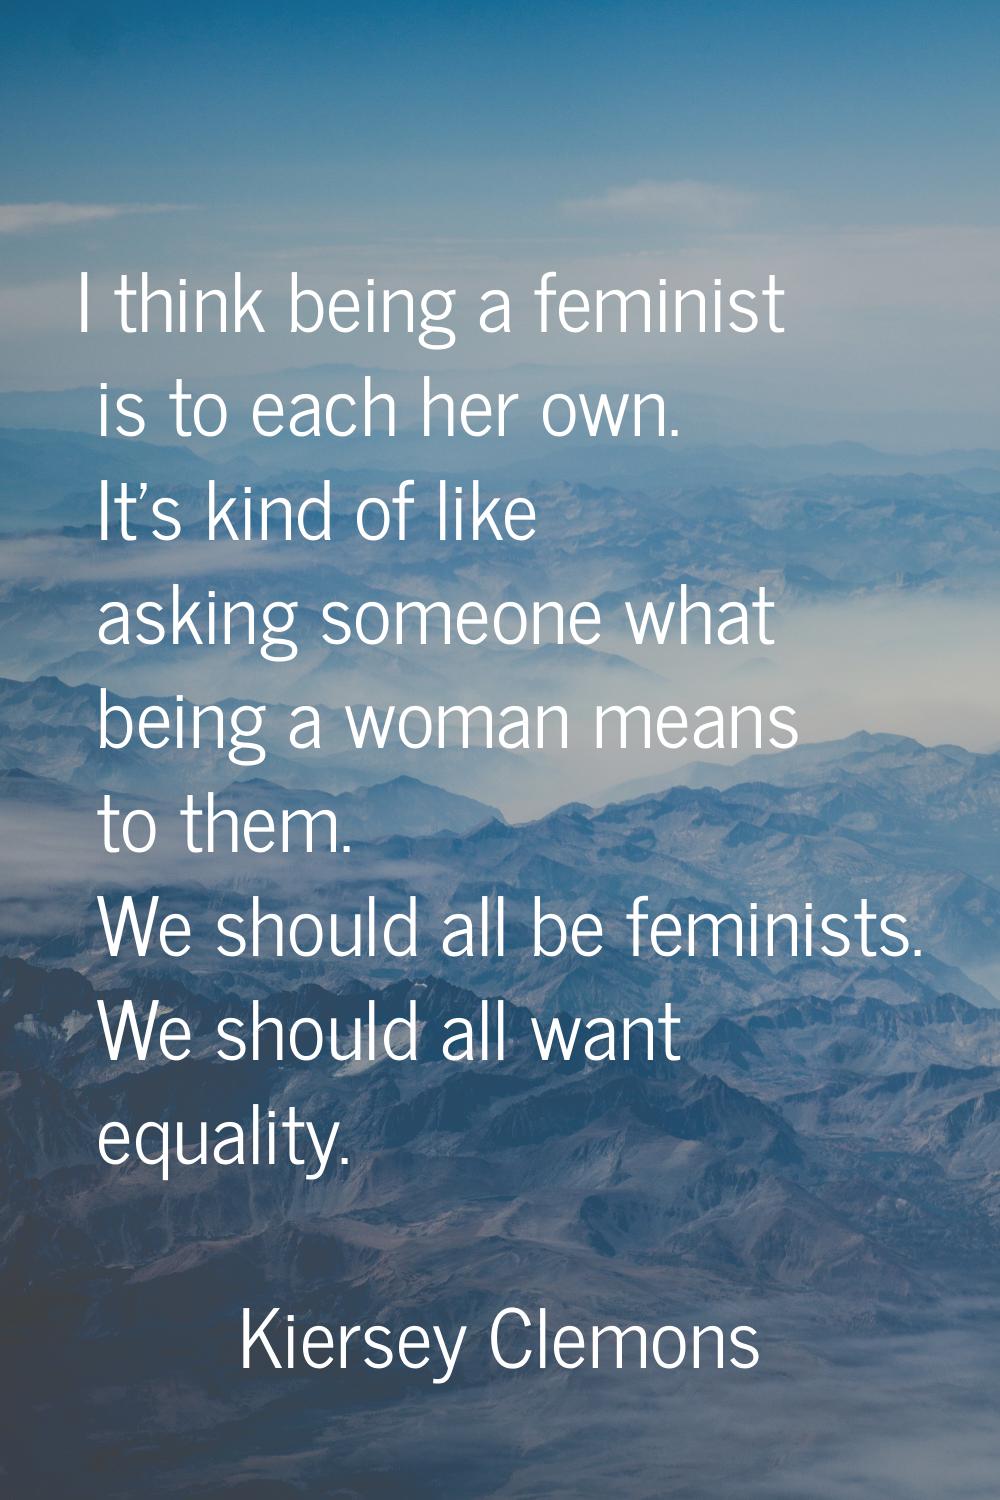 I think being a feminist is to each her own. It's kind of like asking someone what being a woman me